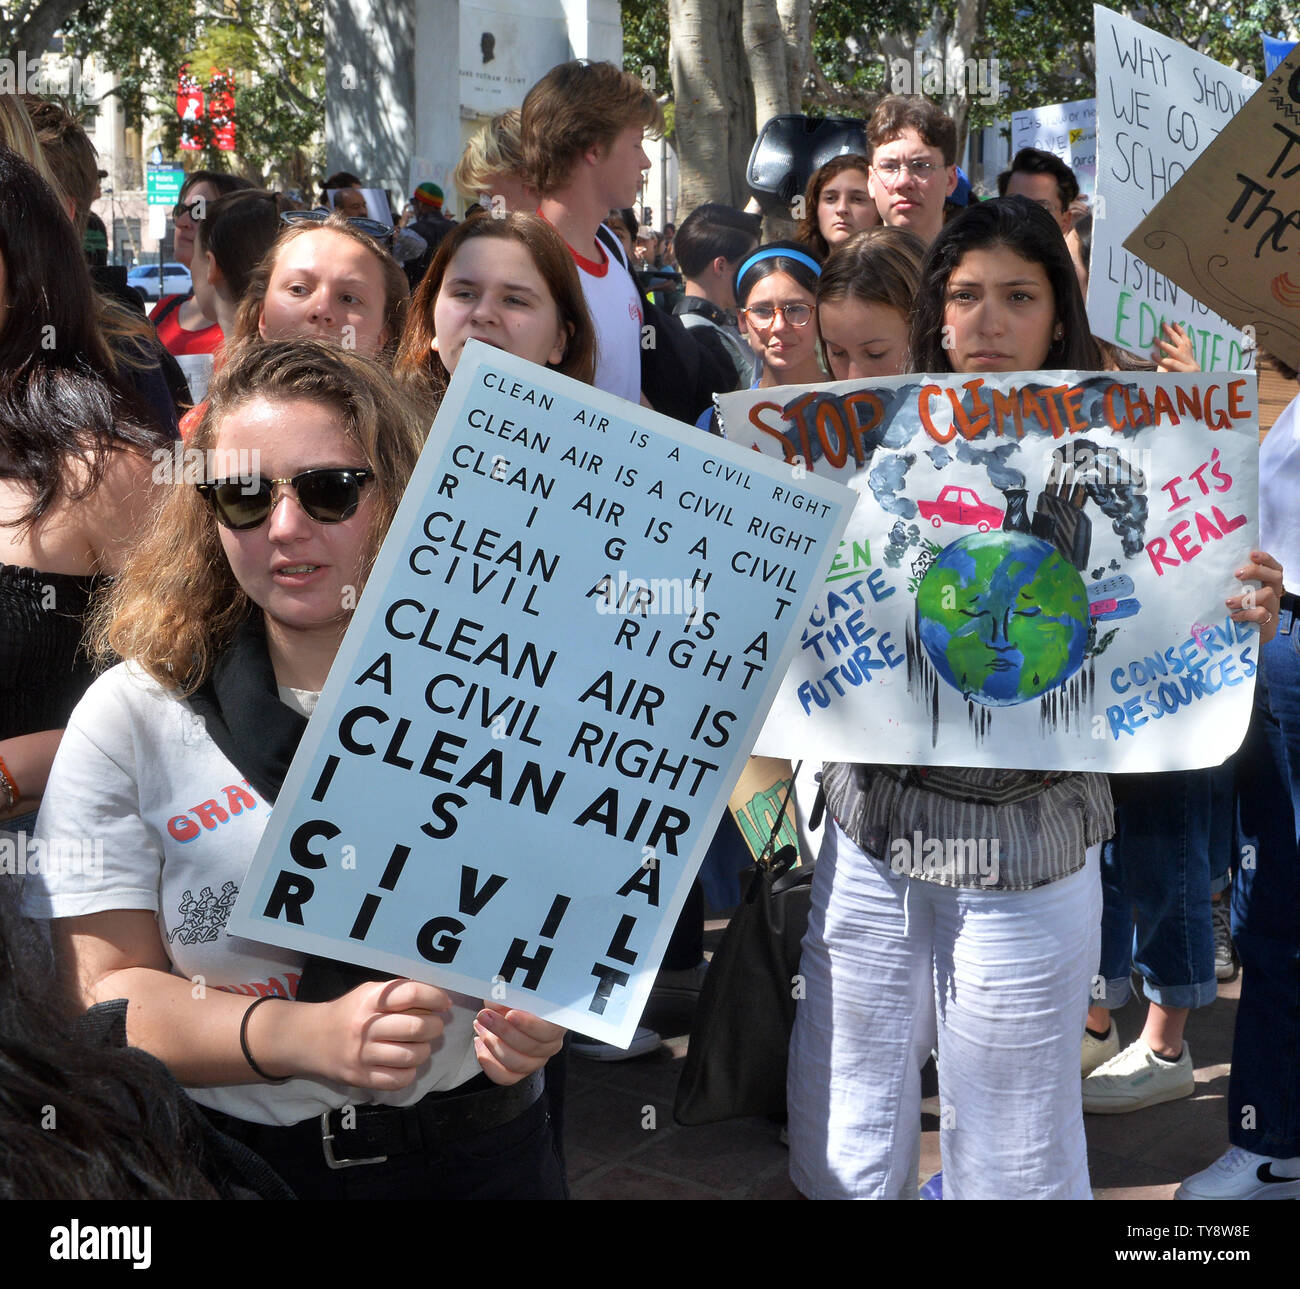 Several hundred students and environmental activists converged on City Hall and marched to the Department of Water and Power to take part in a worldwide school walkout to call for more aggressive action on fighting climate change, with a national embrace of the Green New Deal, an end to fossil fuel infrastructure projects and a number of other aggressive actions on climate change. Protests are also occurred in at least several dozen other California cities, Chicago, New York, Washington D.C., dozens of European capitals, New Zealand, India and elsewhere.  Photo by Jim Ruymen/UPI Stock Photo